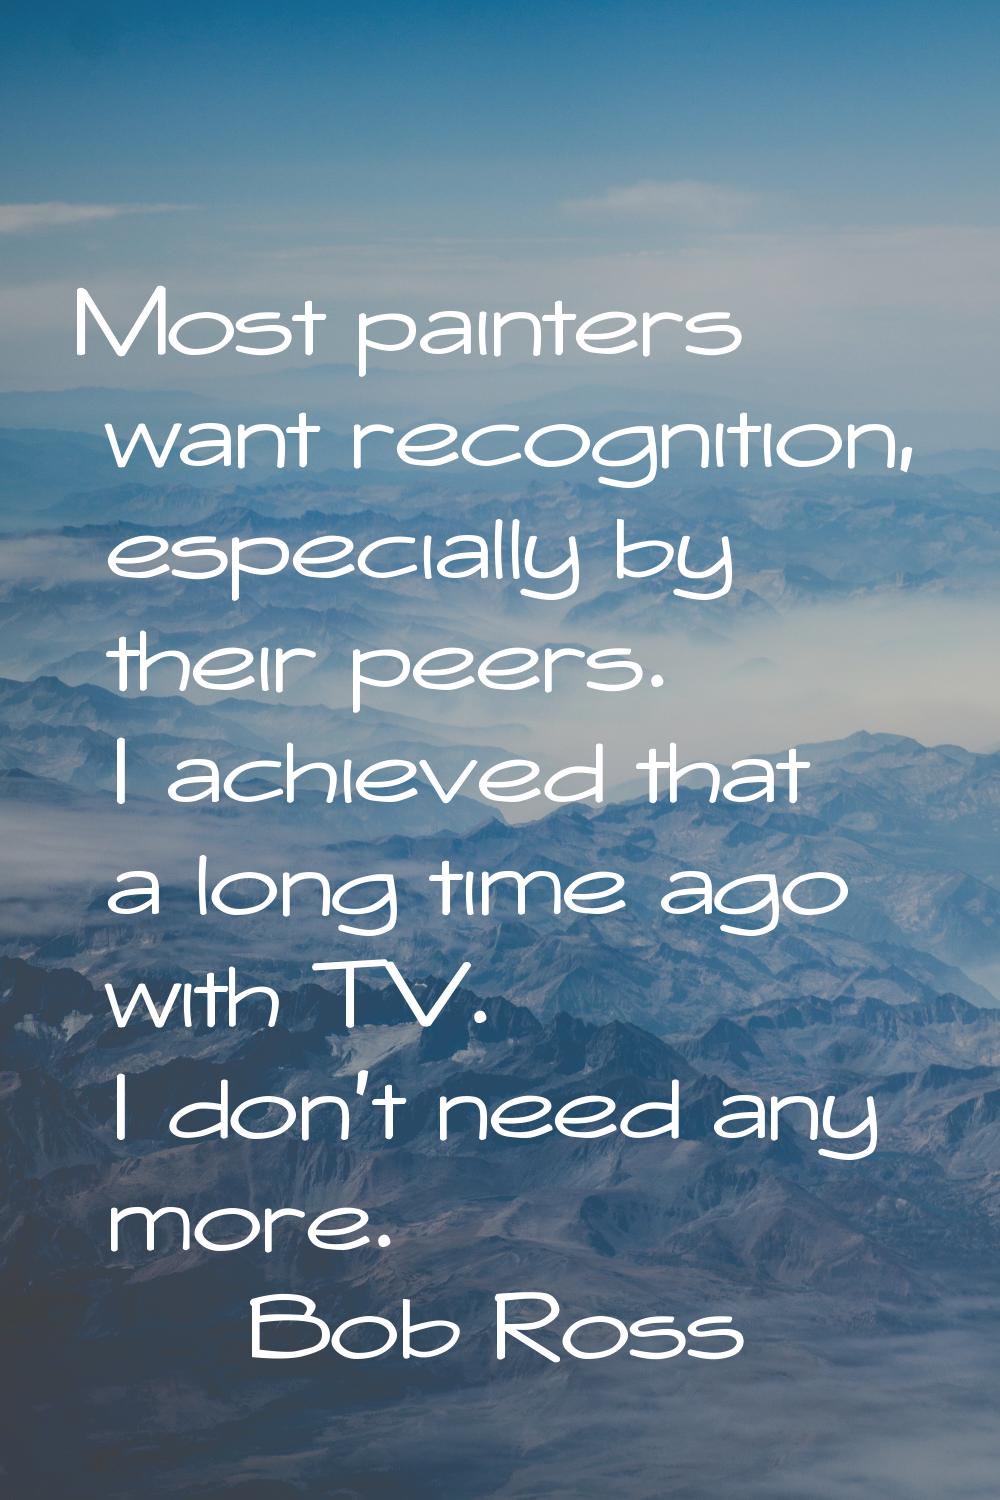 Most painters want recognition, especially by their peers. I achieved that a long time ago with TV.